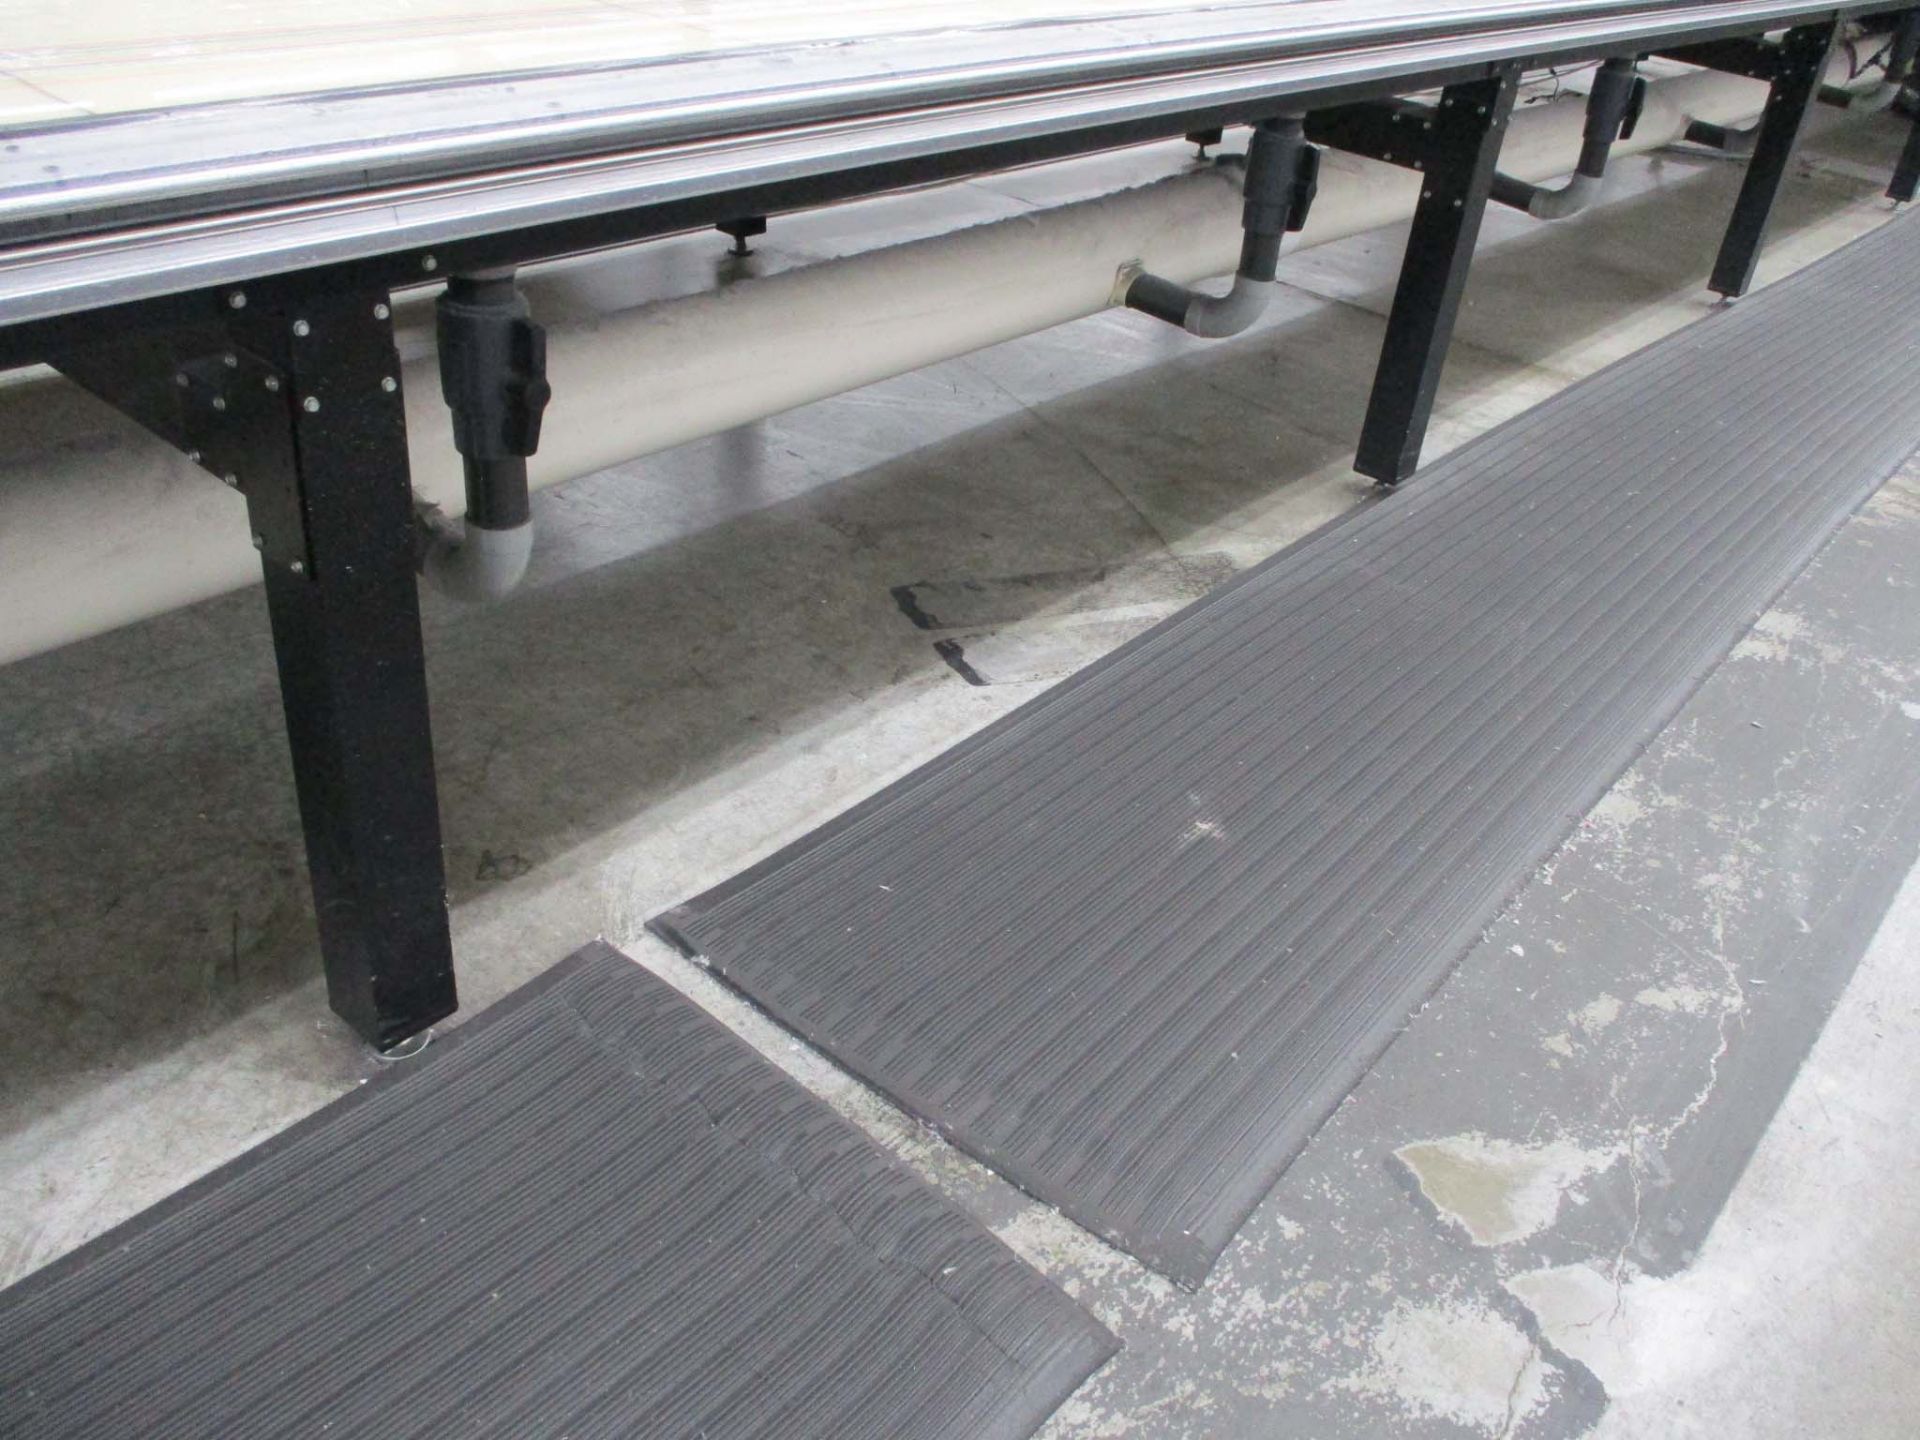 Custom made by Gerber, - Self Contained Vacuum Cutting Table - 109ft long x 6ft wide Vacuum Cutting - Image 10 of 17